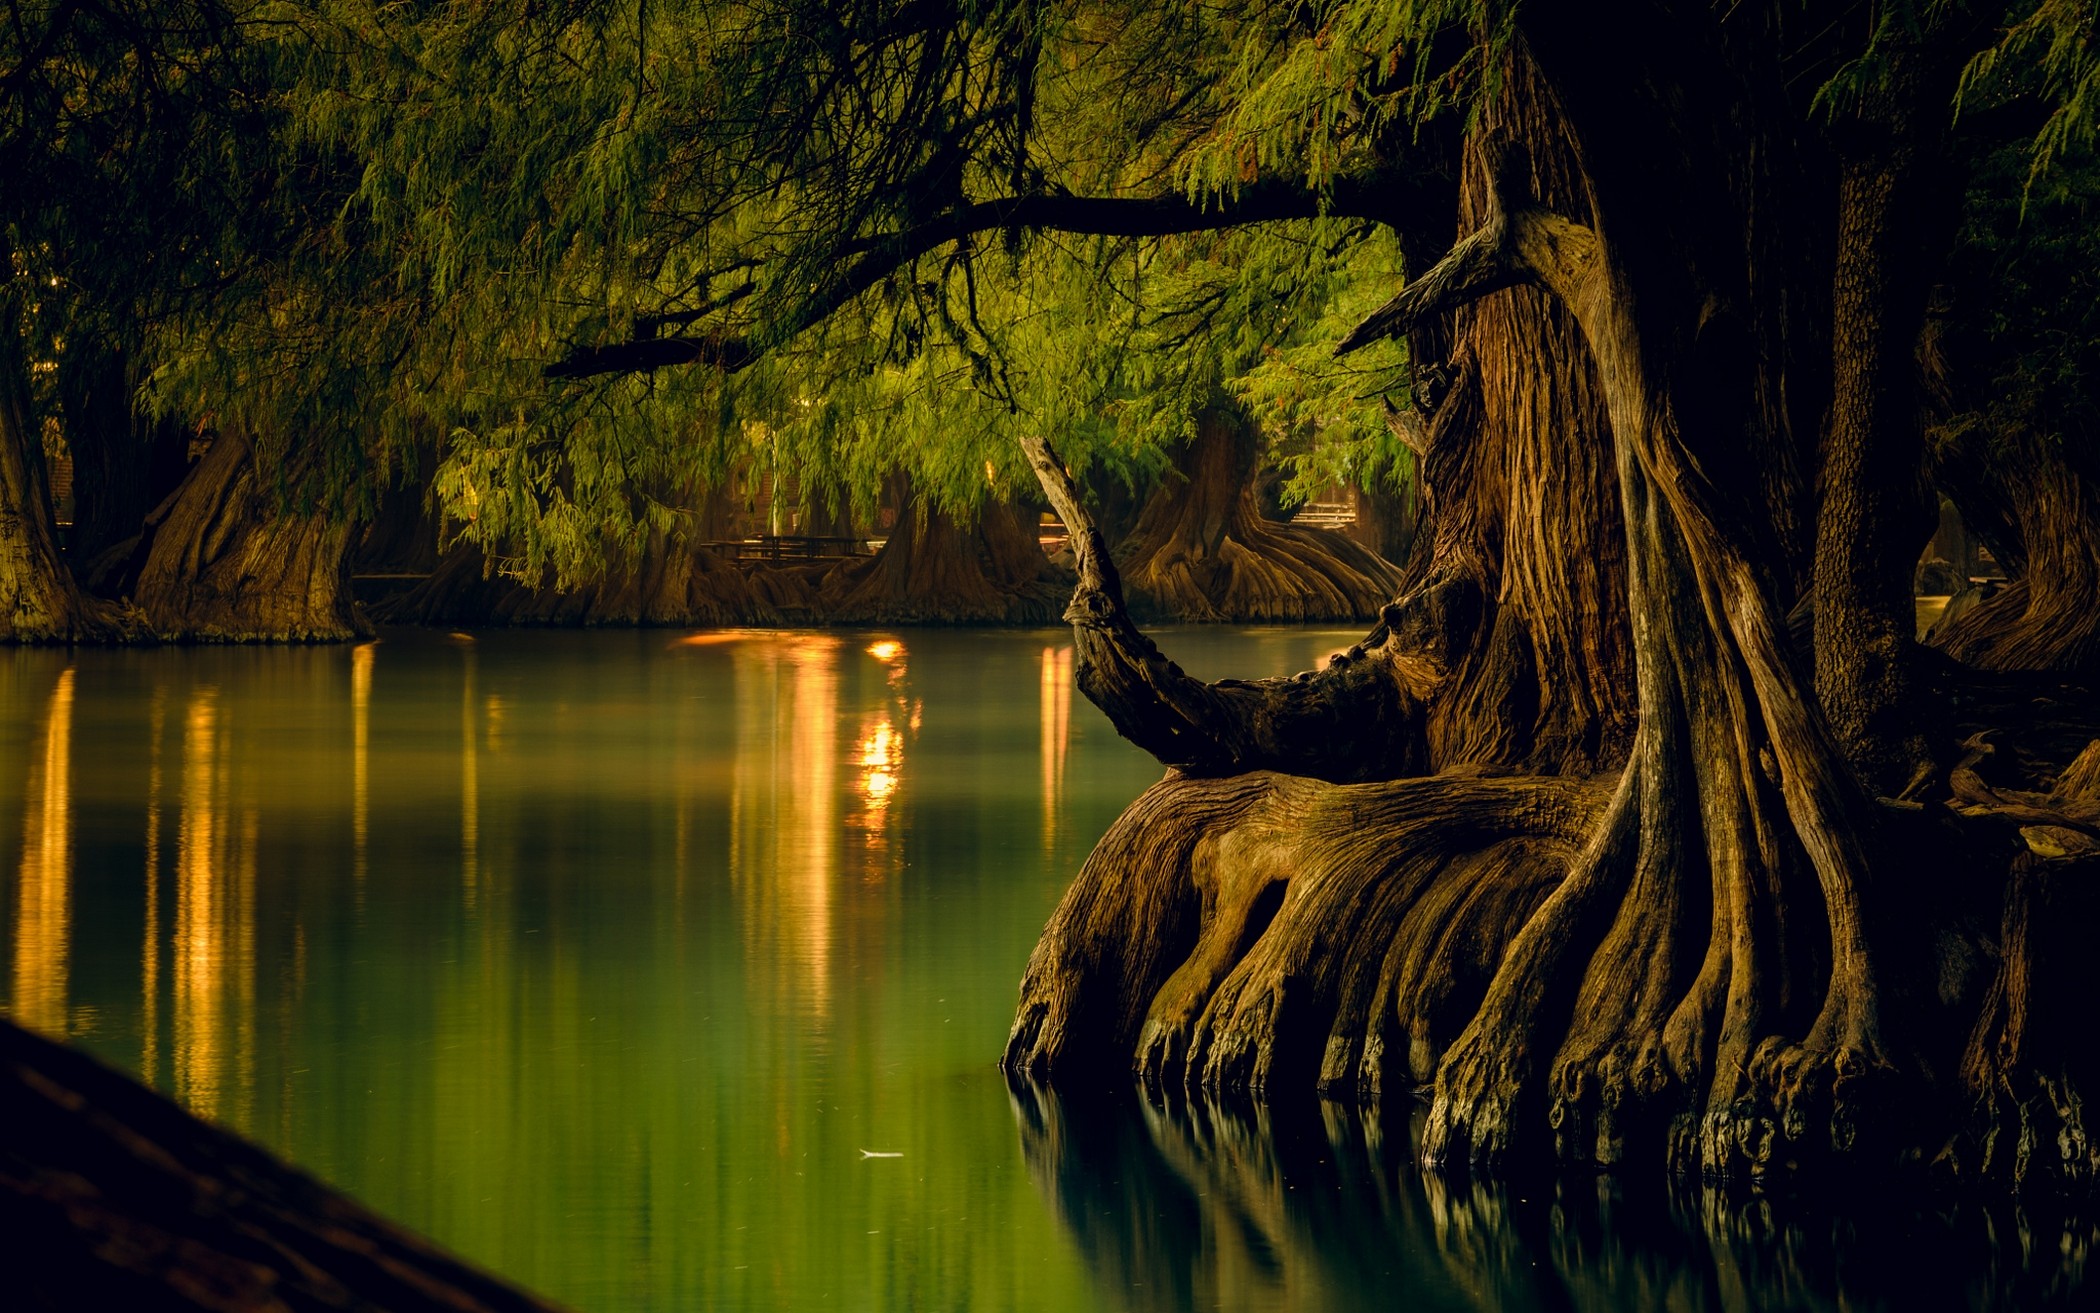 General 2100x1313 nature lake forest water reflection trees roots calm Mexico low light